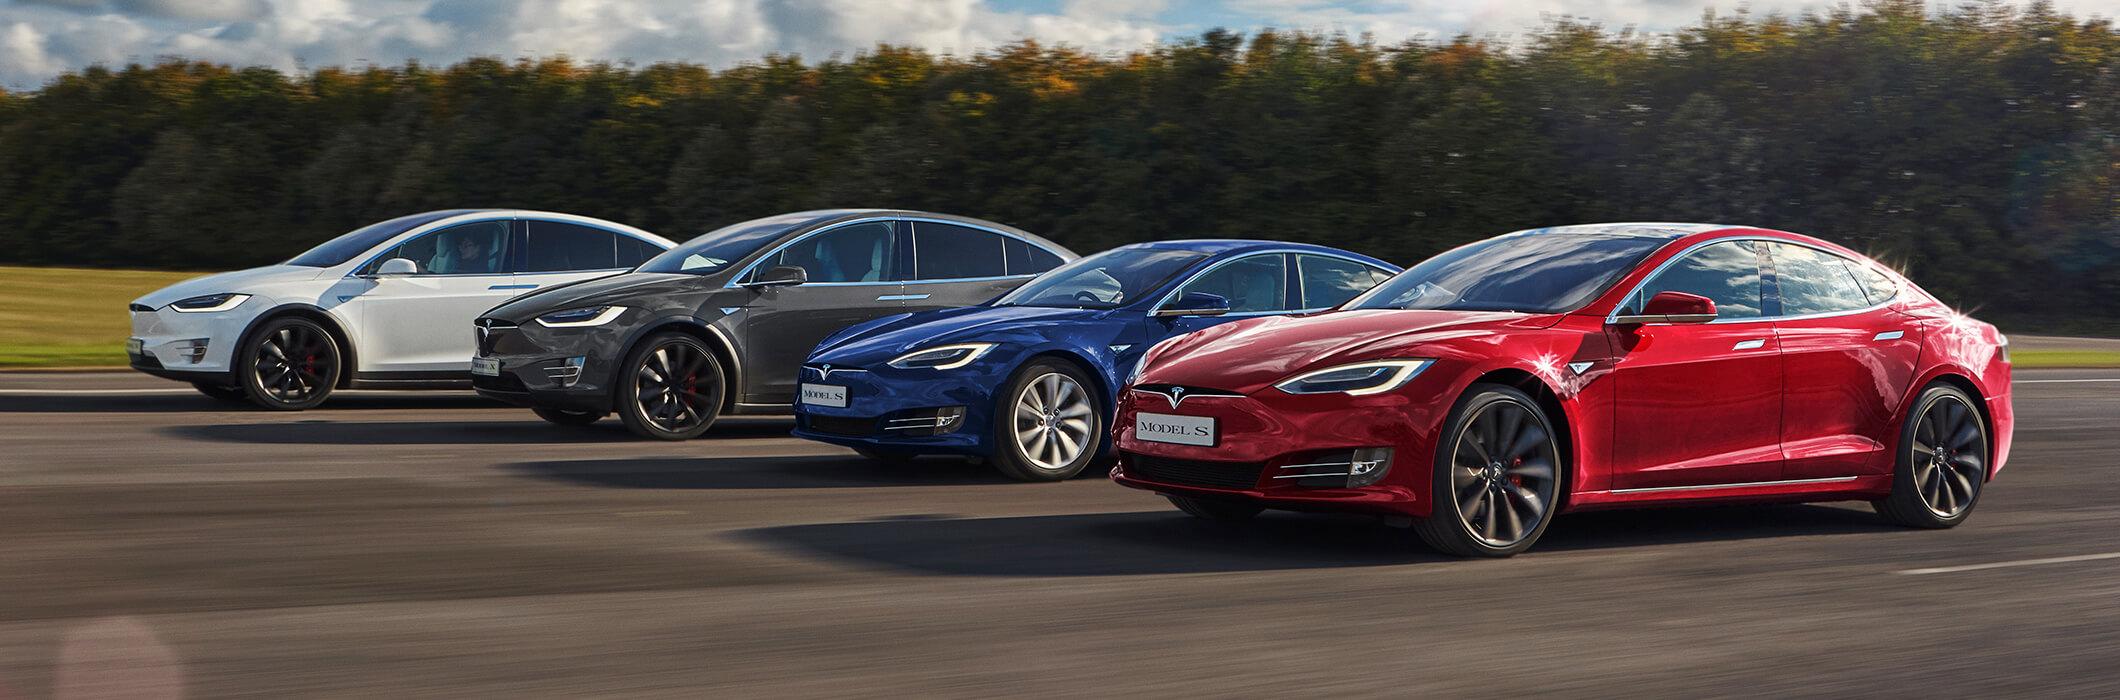 Tesla CEO Elon Musk is changing your perception of transportation